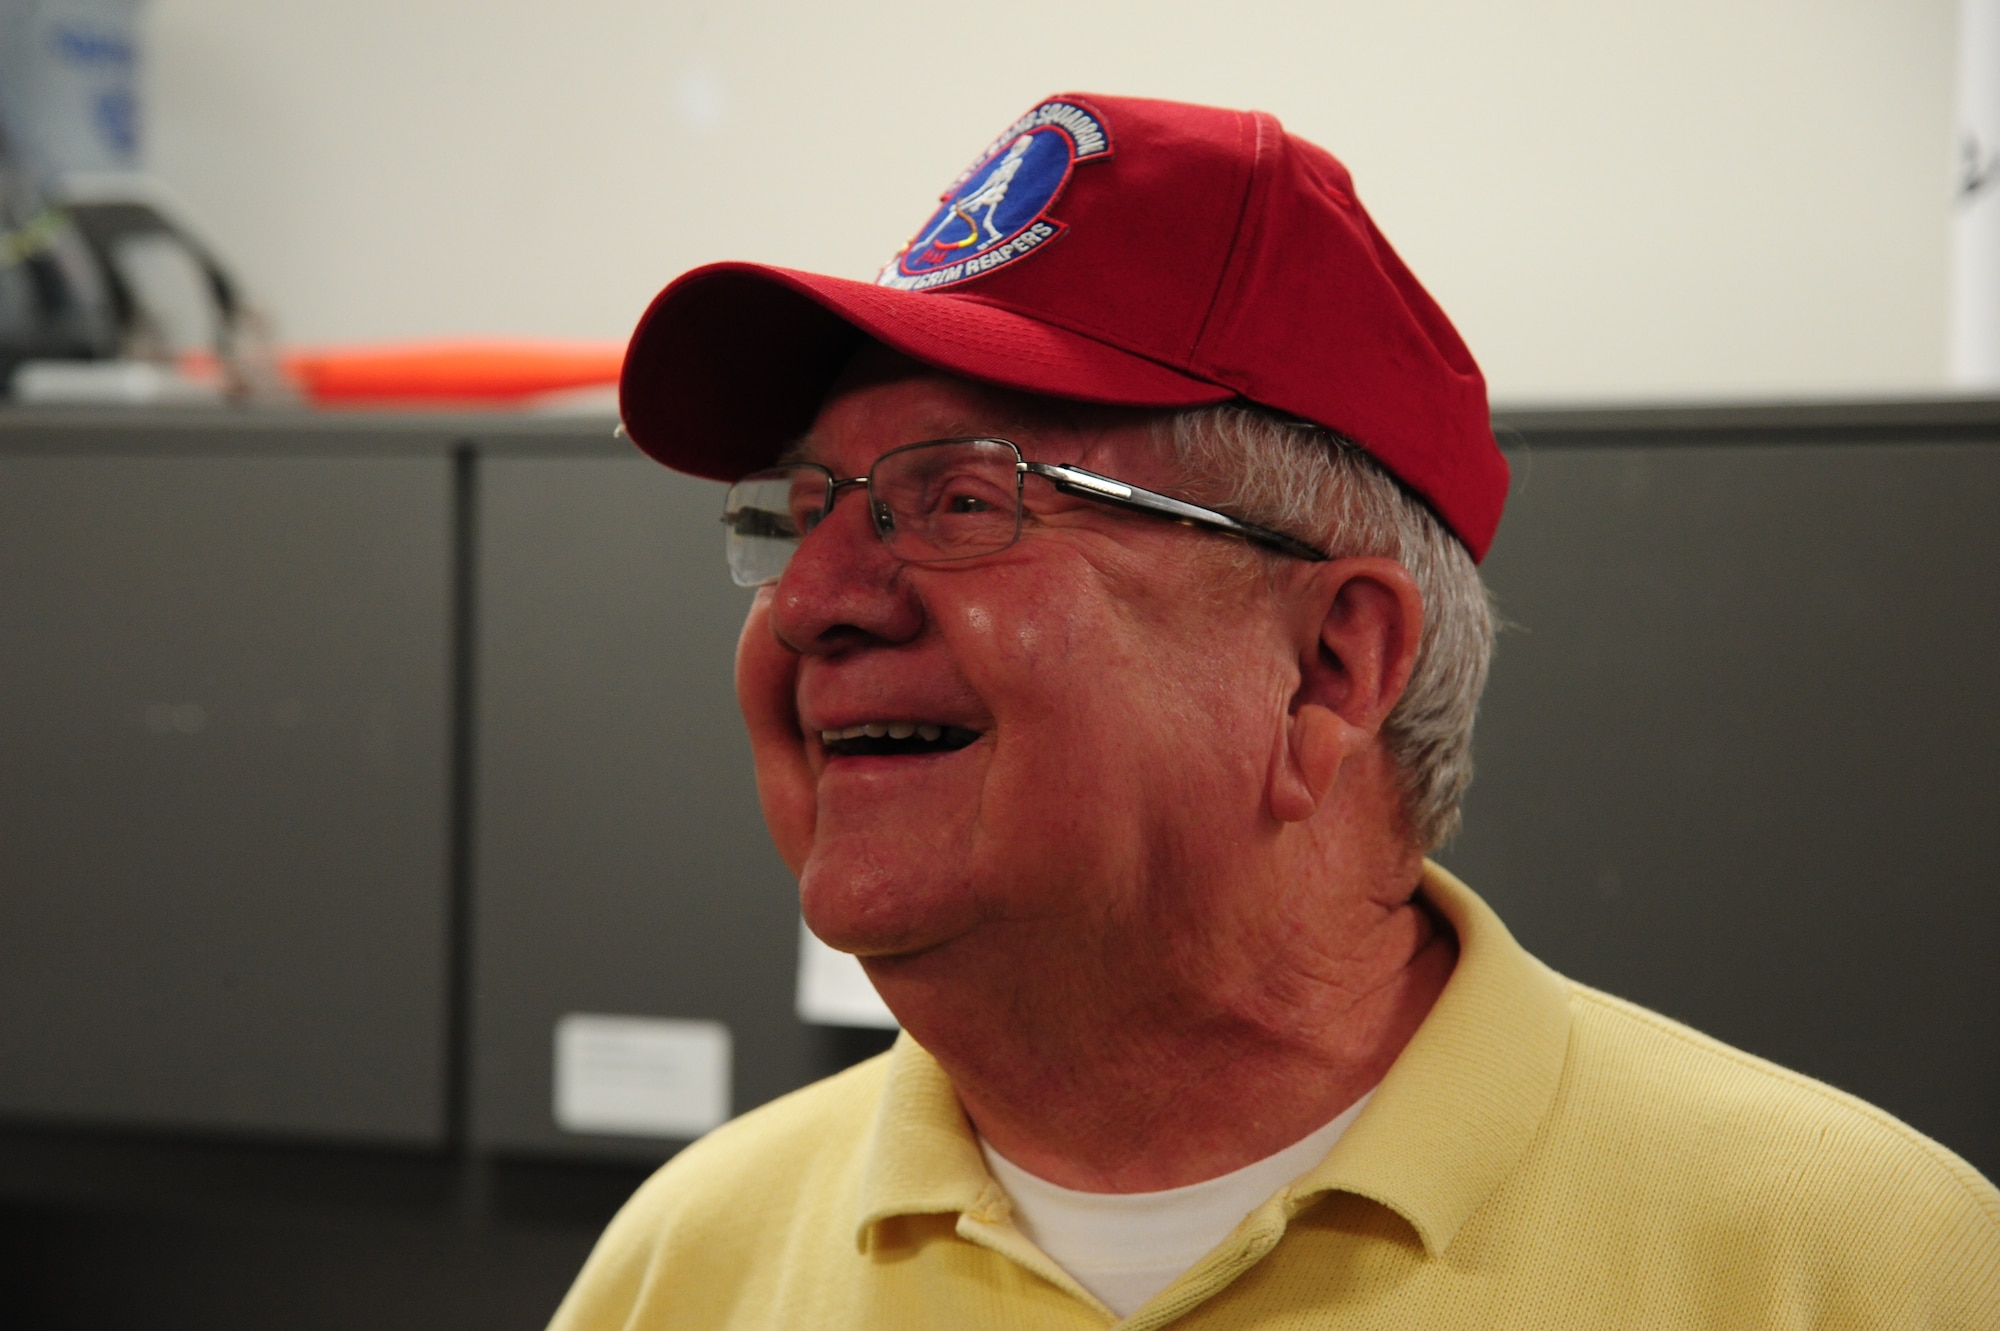 Bob Parks, the 13th Bomb Squadron Association (BS) vice president, smiles during his visit at Whiteman Air Force Base, Mo., Dec. 17, 2015. The value of the visit to was to inform Airmen of the unit’s lineage and educate them on opportunities to carry on that legacy through the association. (U.S. Air Force photo by Senior Airman Keenan Berry)